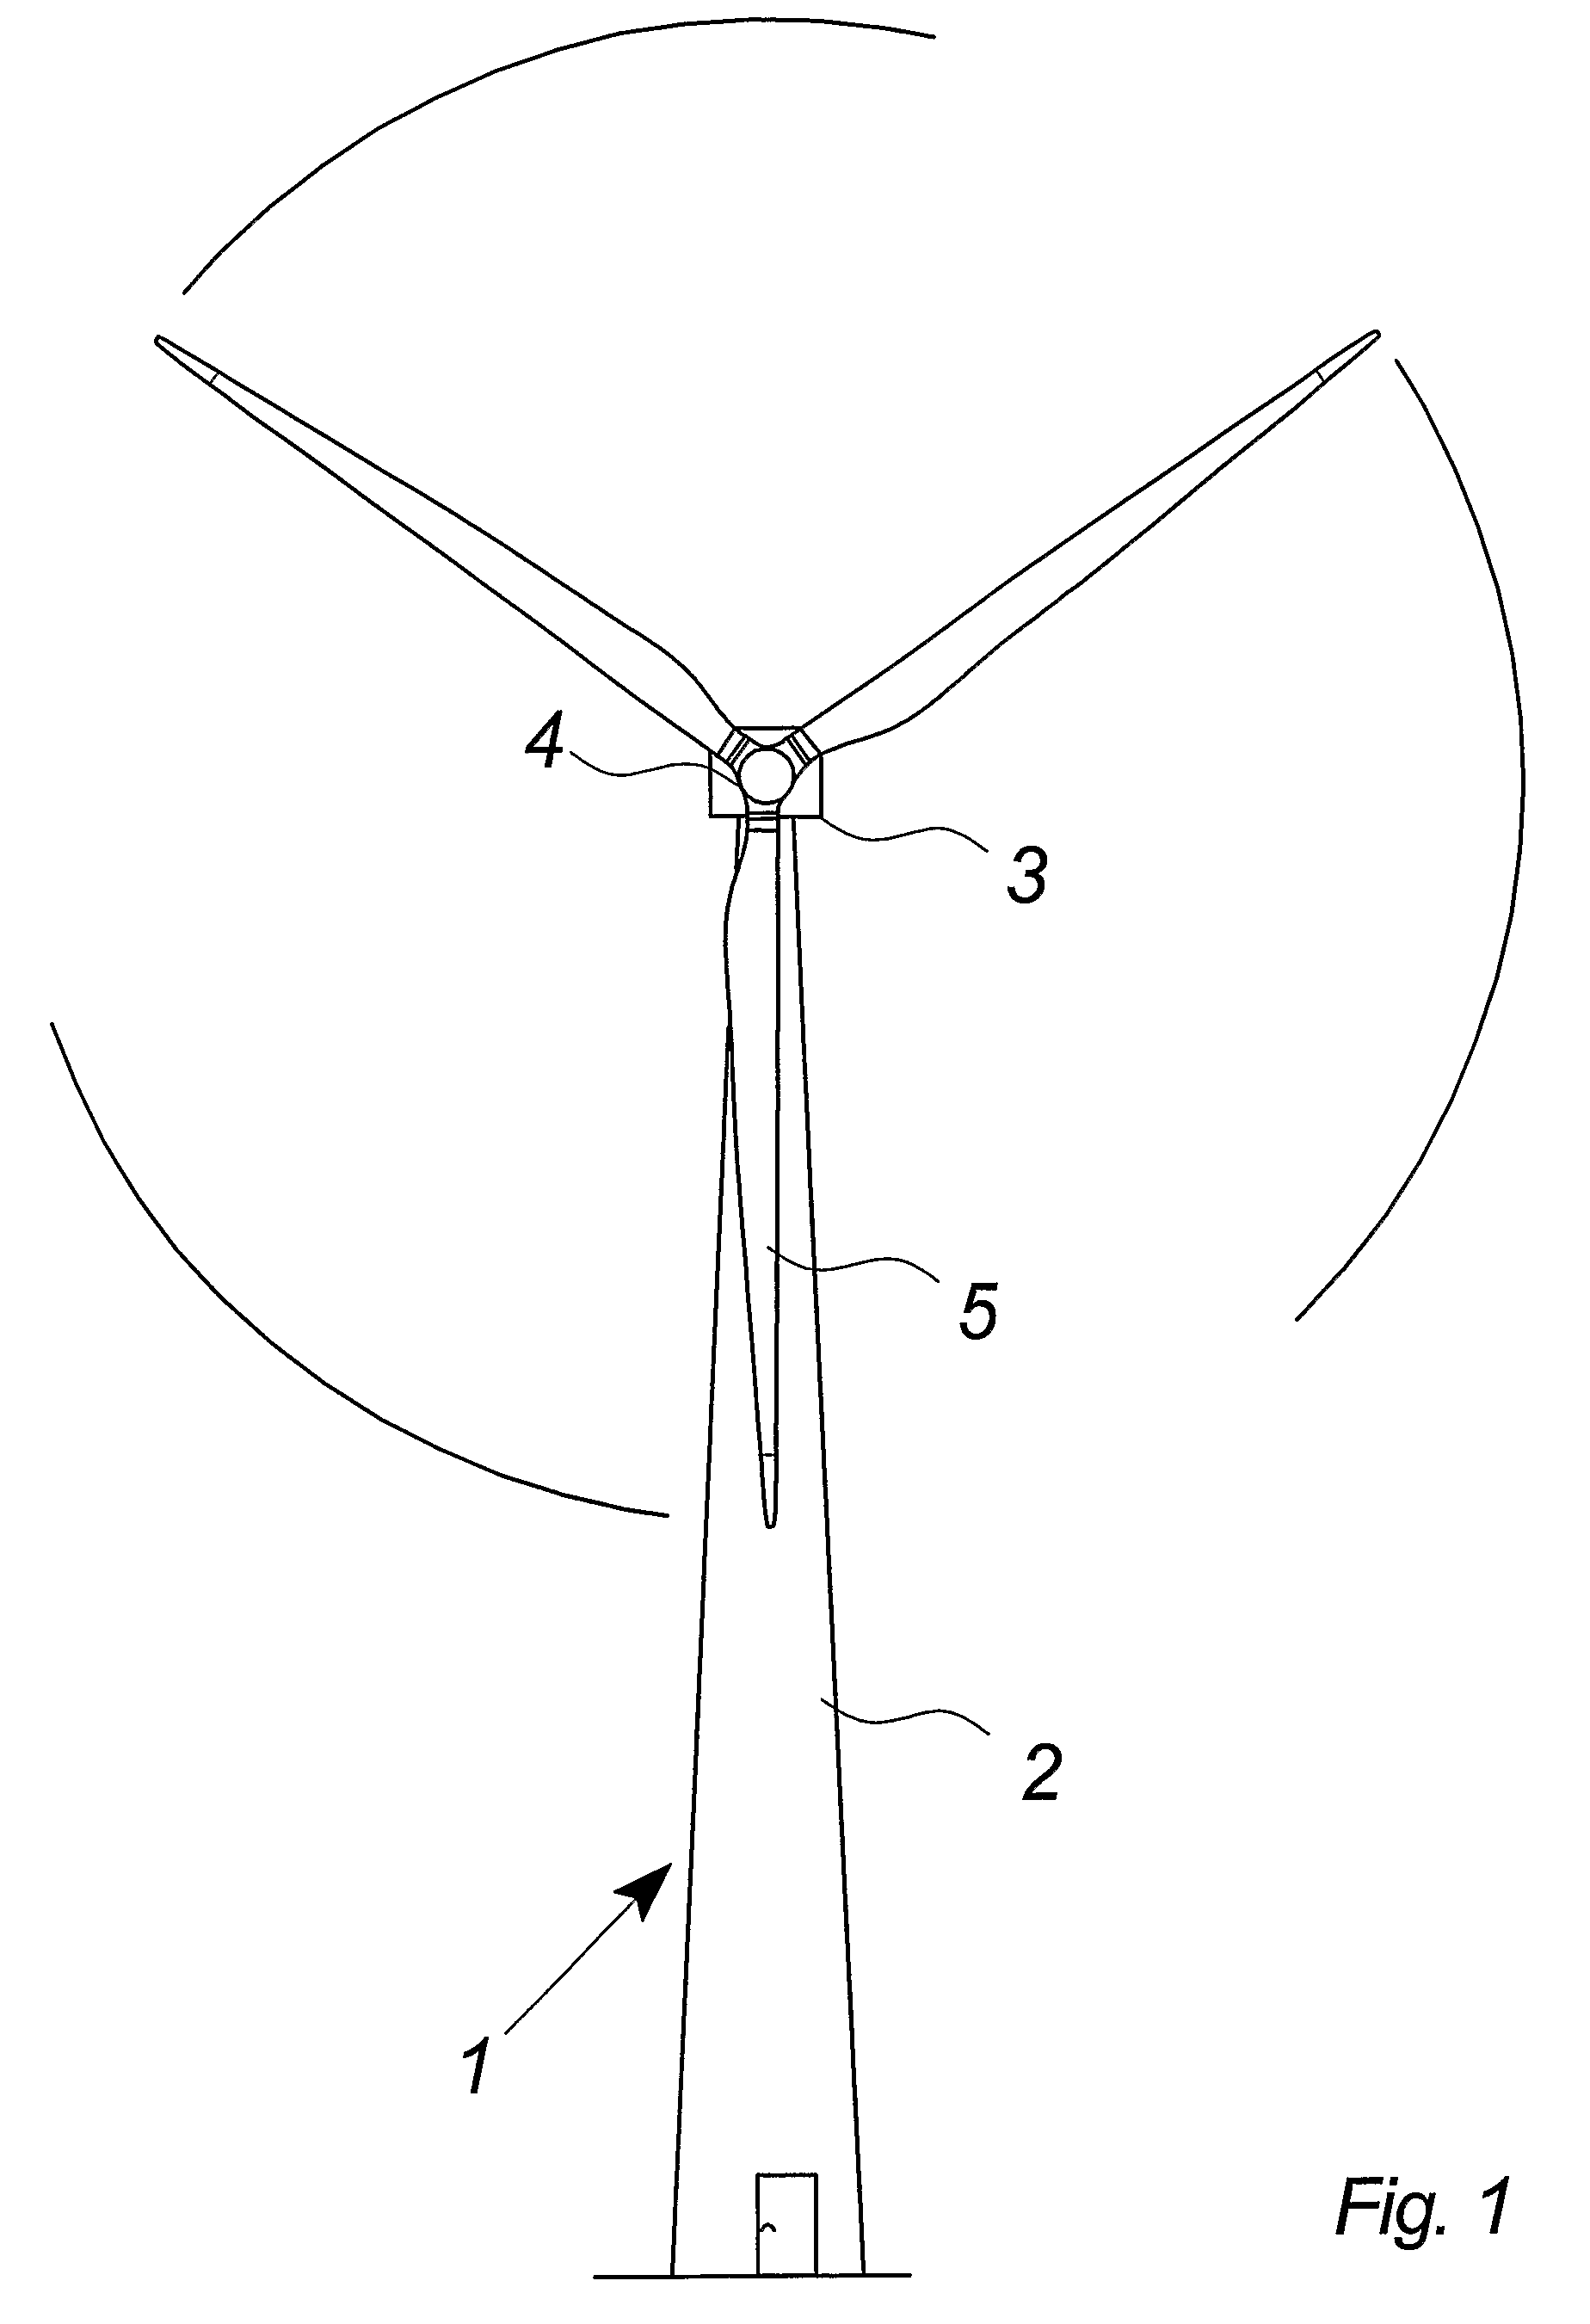 Method of controlling a wind turbine connected to an electric utility grid